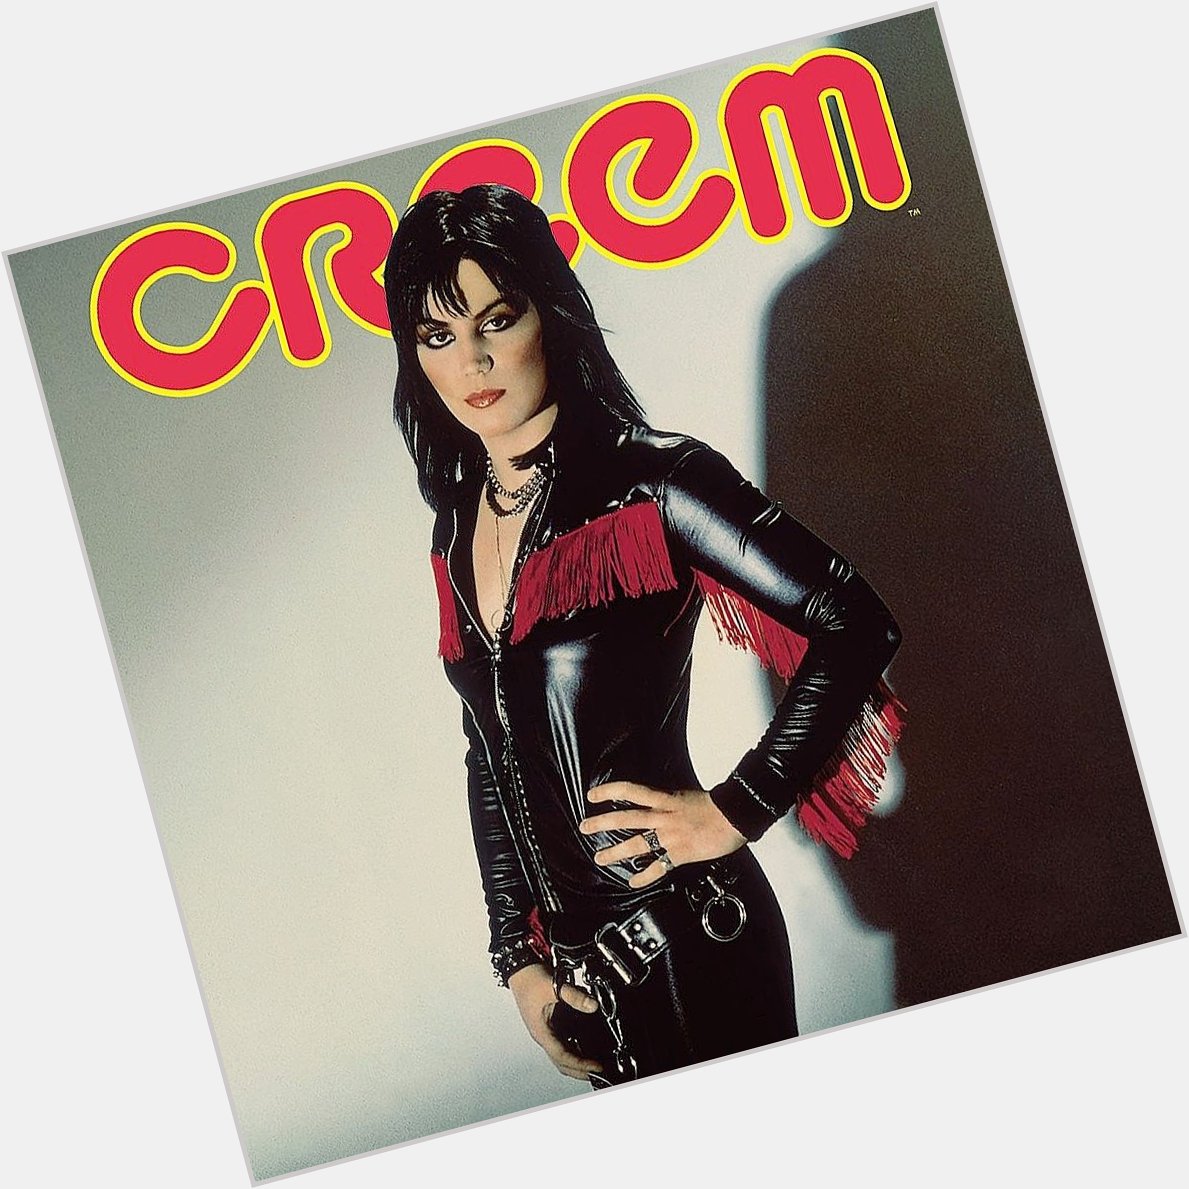 Happy 60th birthday to Joan Jett! She\s still the coolest of all. 